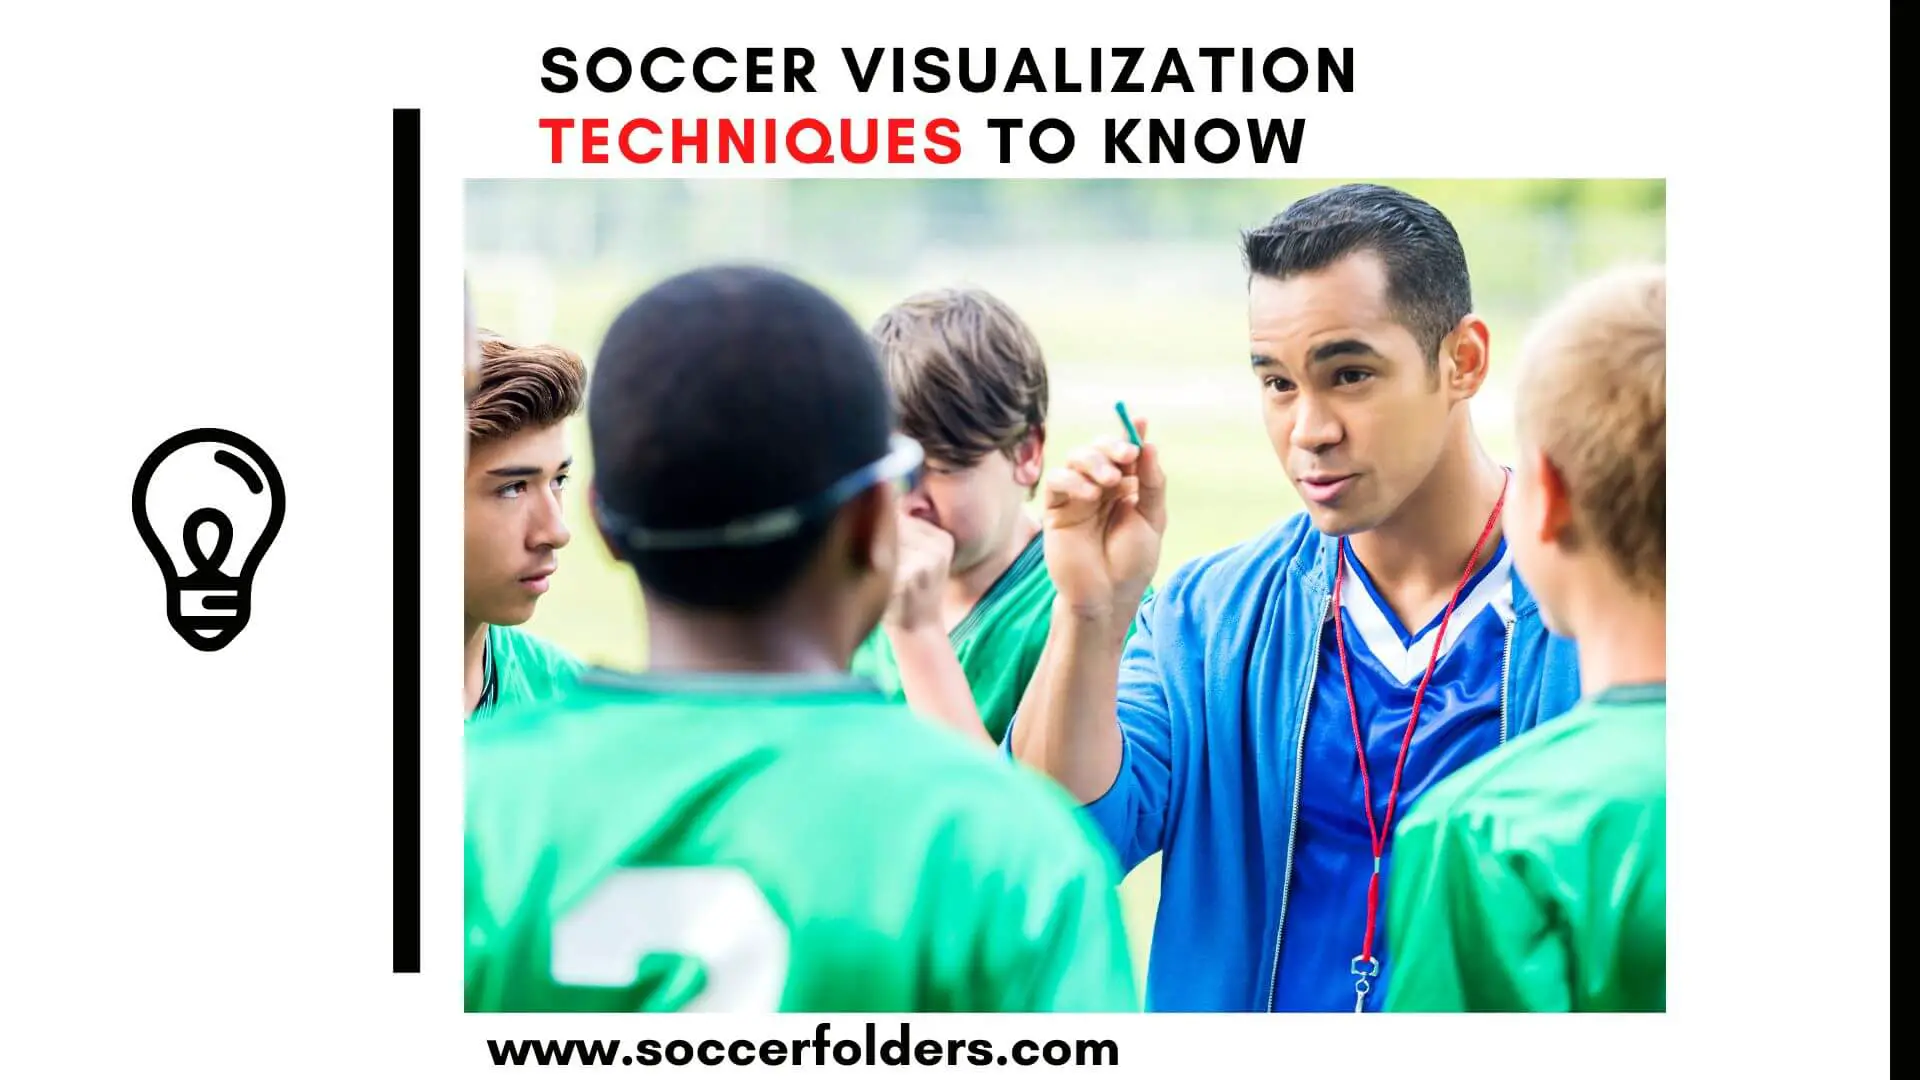 Soccer visualization techniques - Featured Image